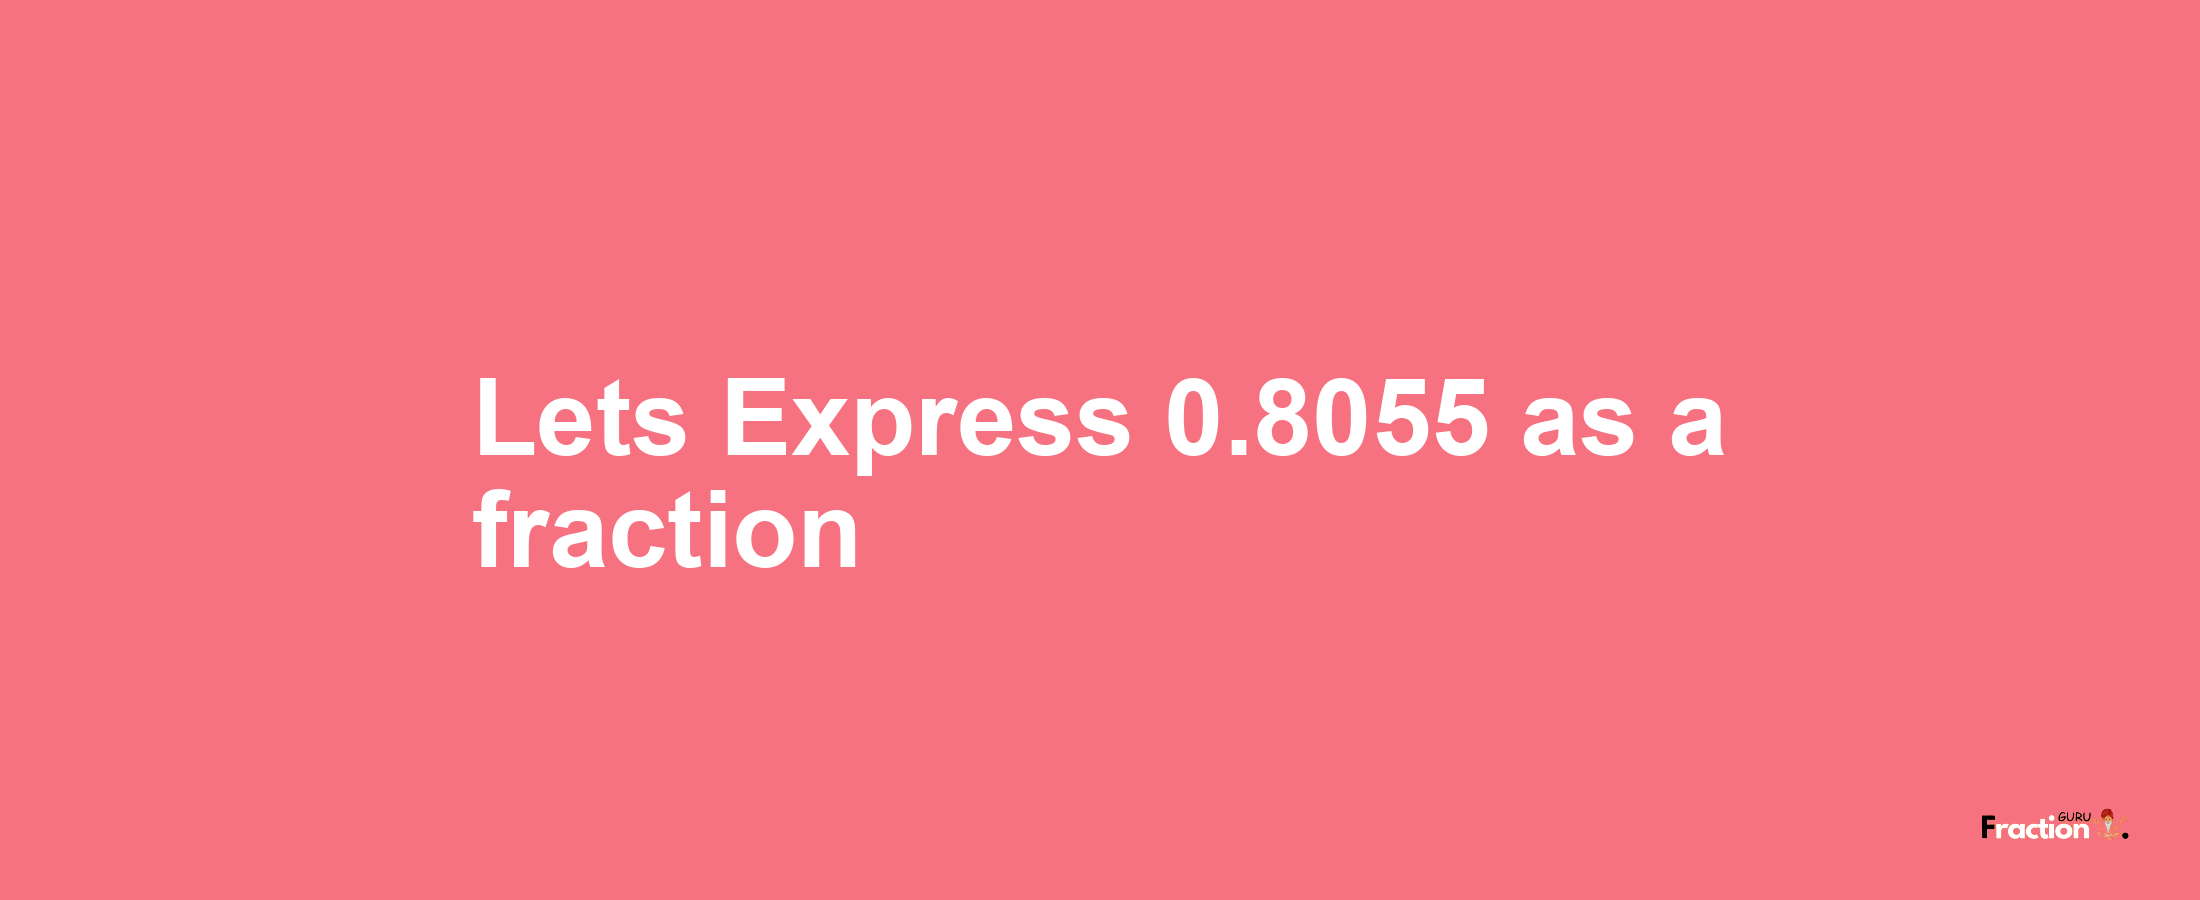 Lets Express 0.8055 as afraction